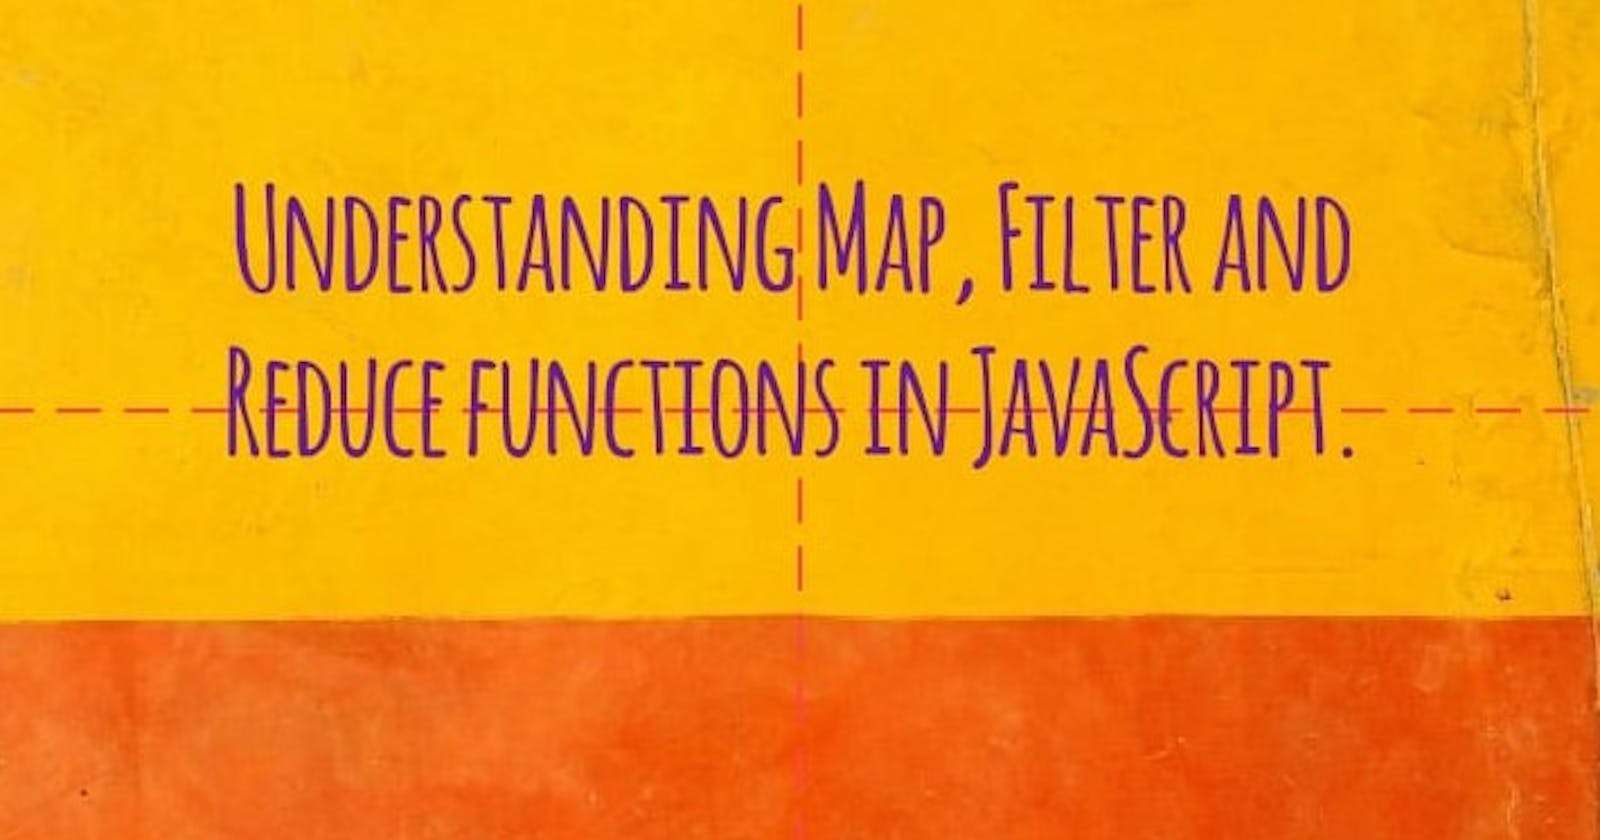 Understanding Map, Filter and Reduce functions in JavaScript.